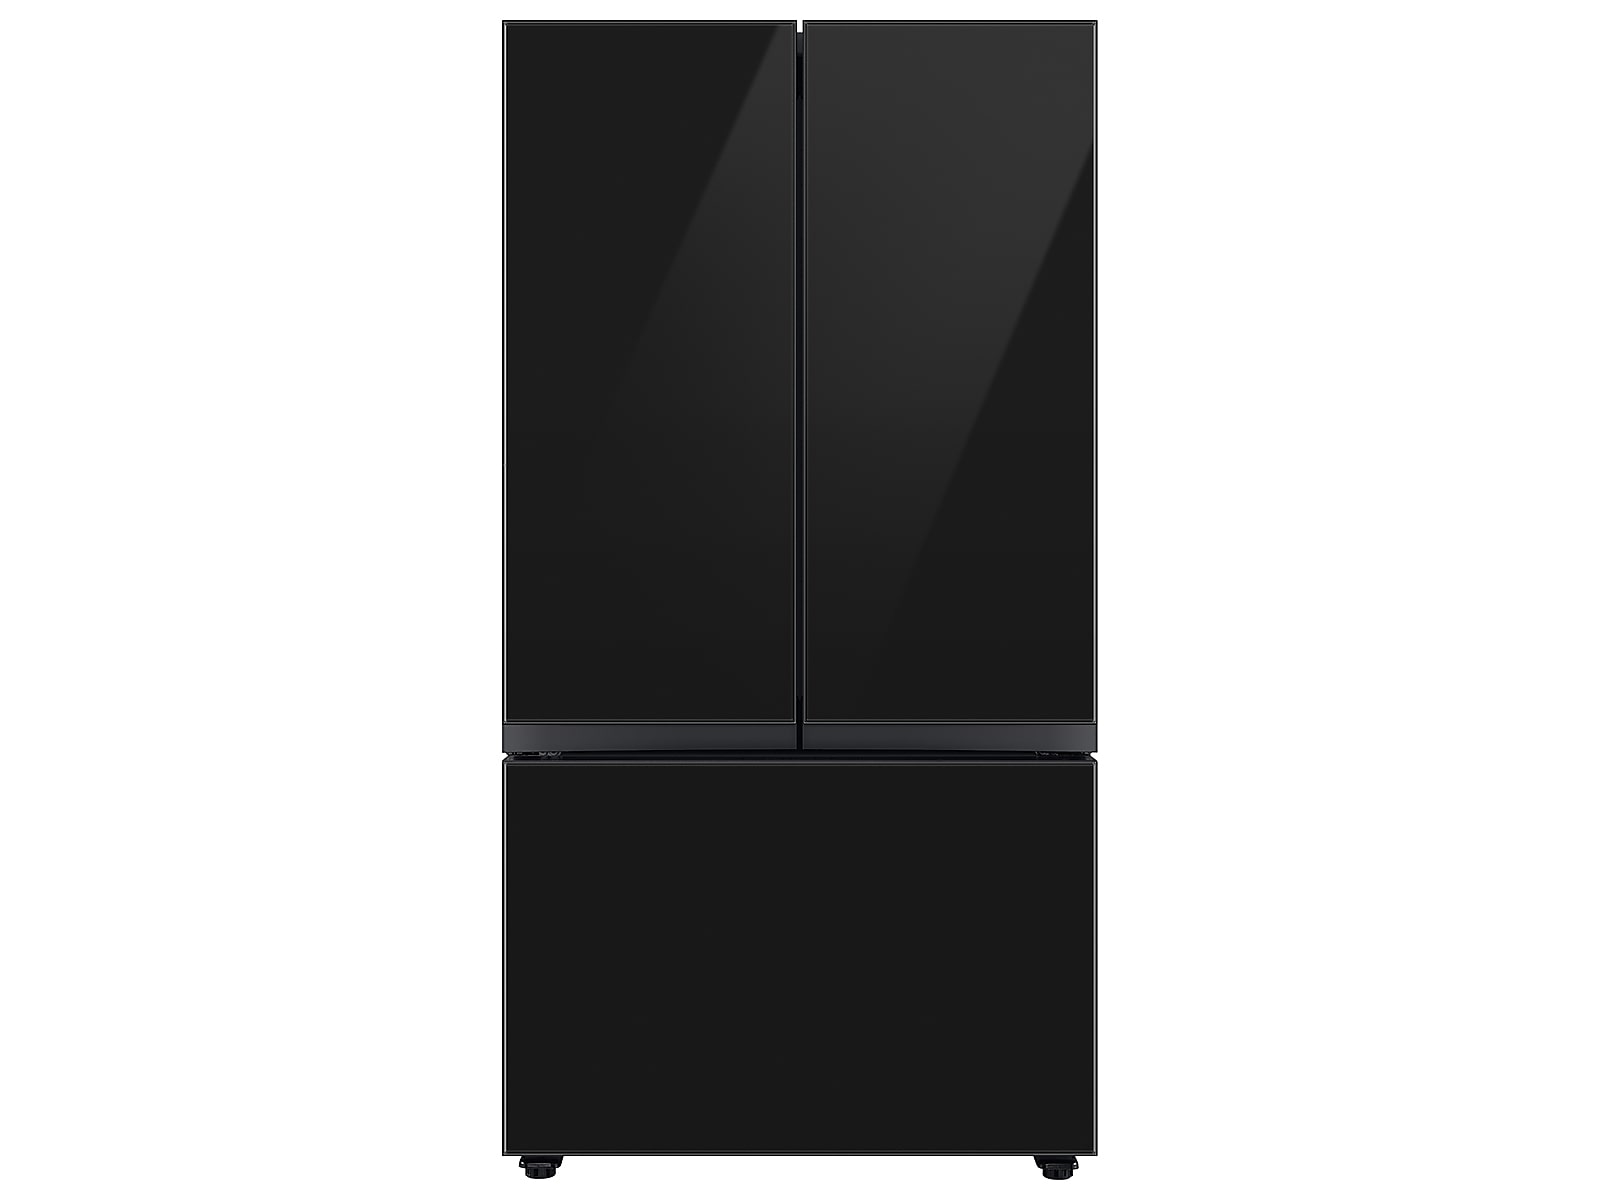 Samsung Bespoke 3-Door French Door Refrigerator (24 cu. ft.) with AutoFill Water Pitcher in Charcoal Glass(BNDL-1650393215140)